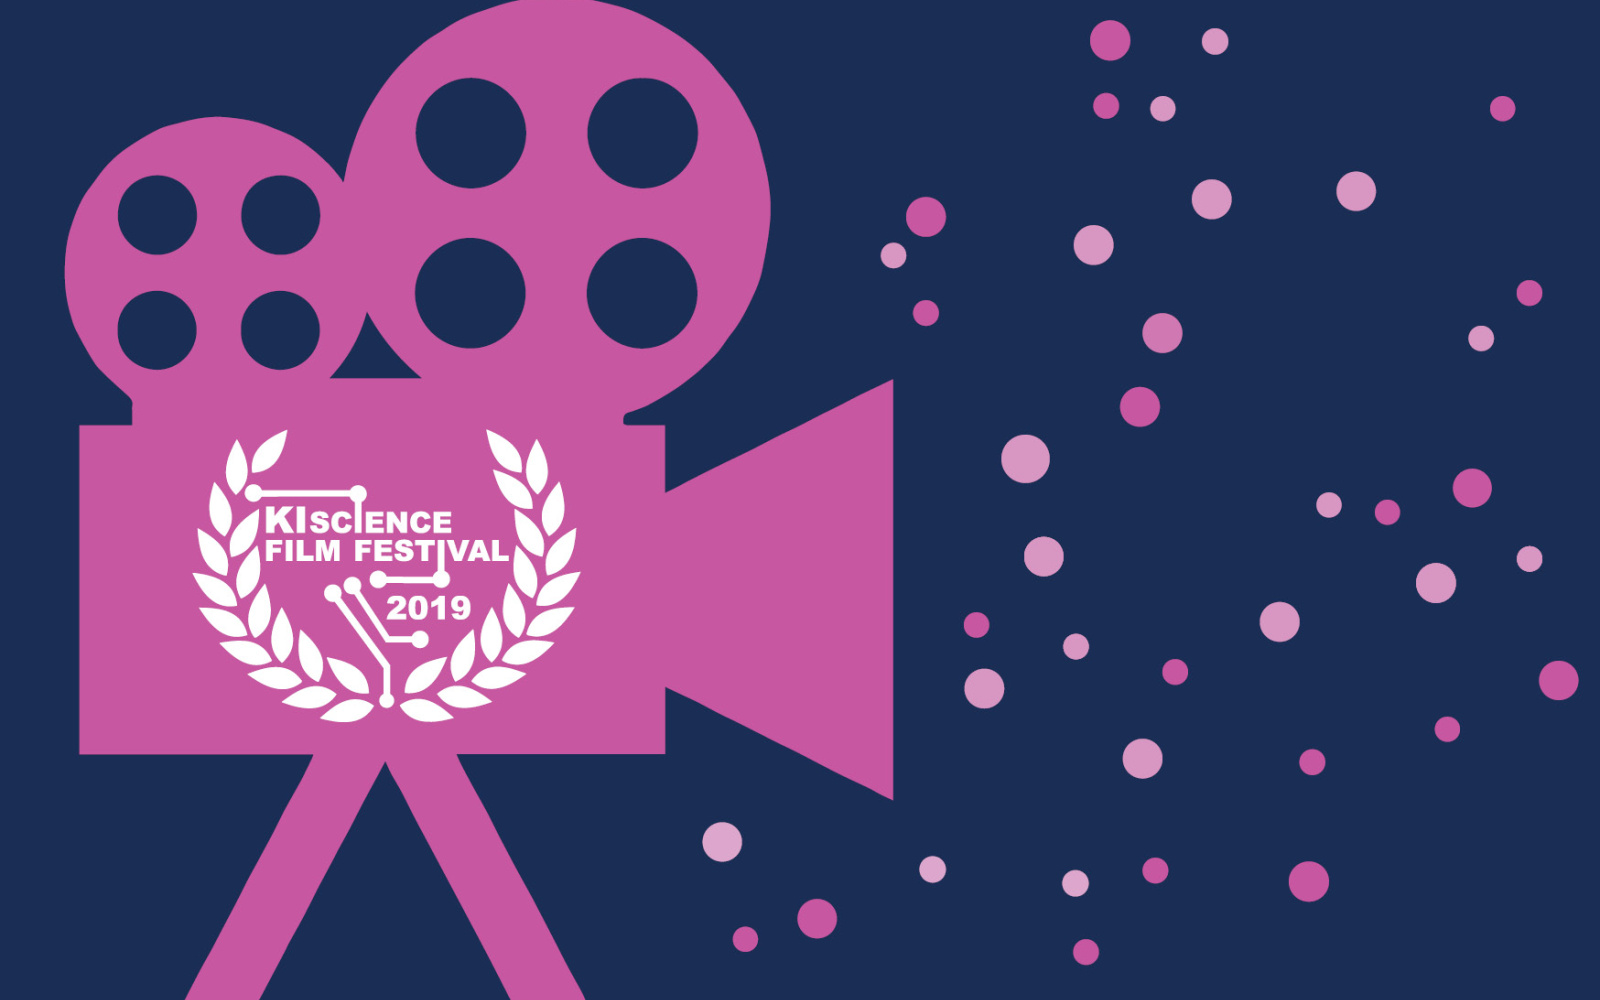 Graphic of the KI Science Film Festival 2019 with a pink camera icon against a dark background.